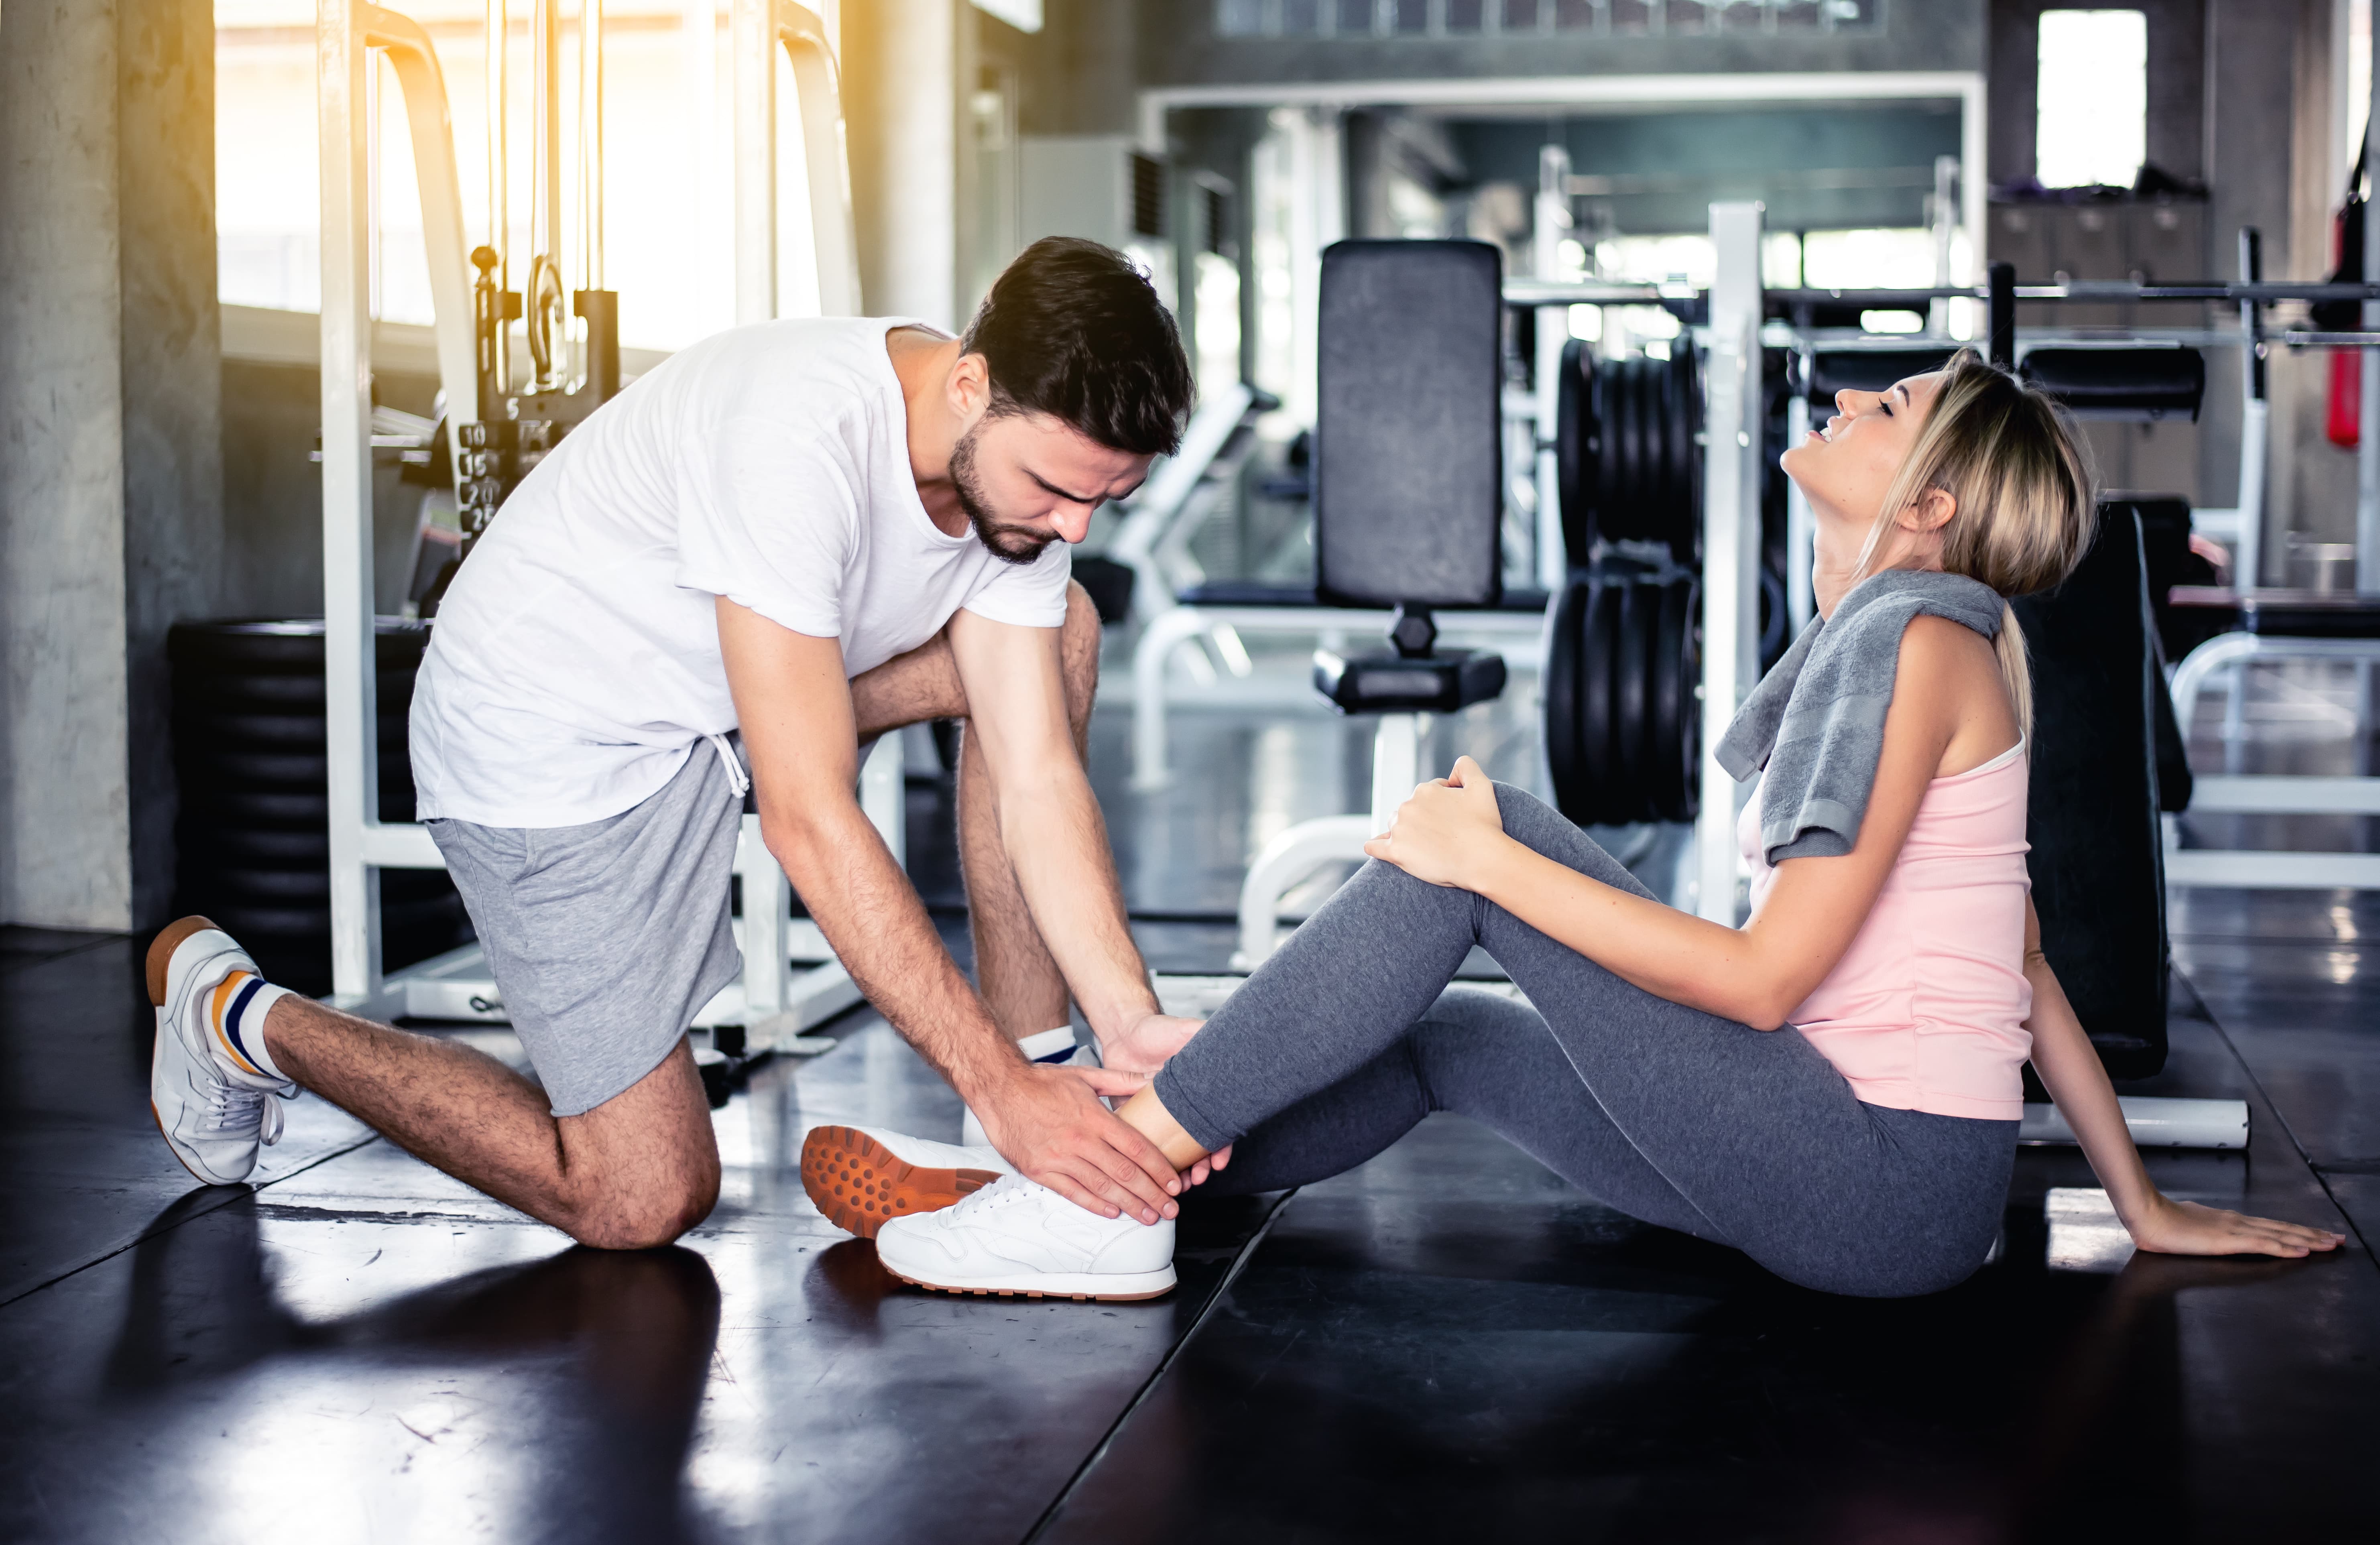 woman is looked after man following injury to leg in gym